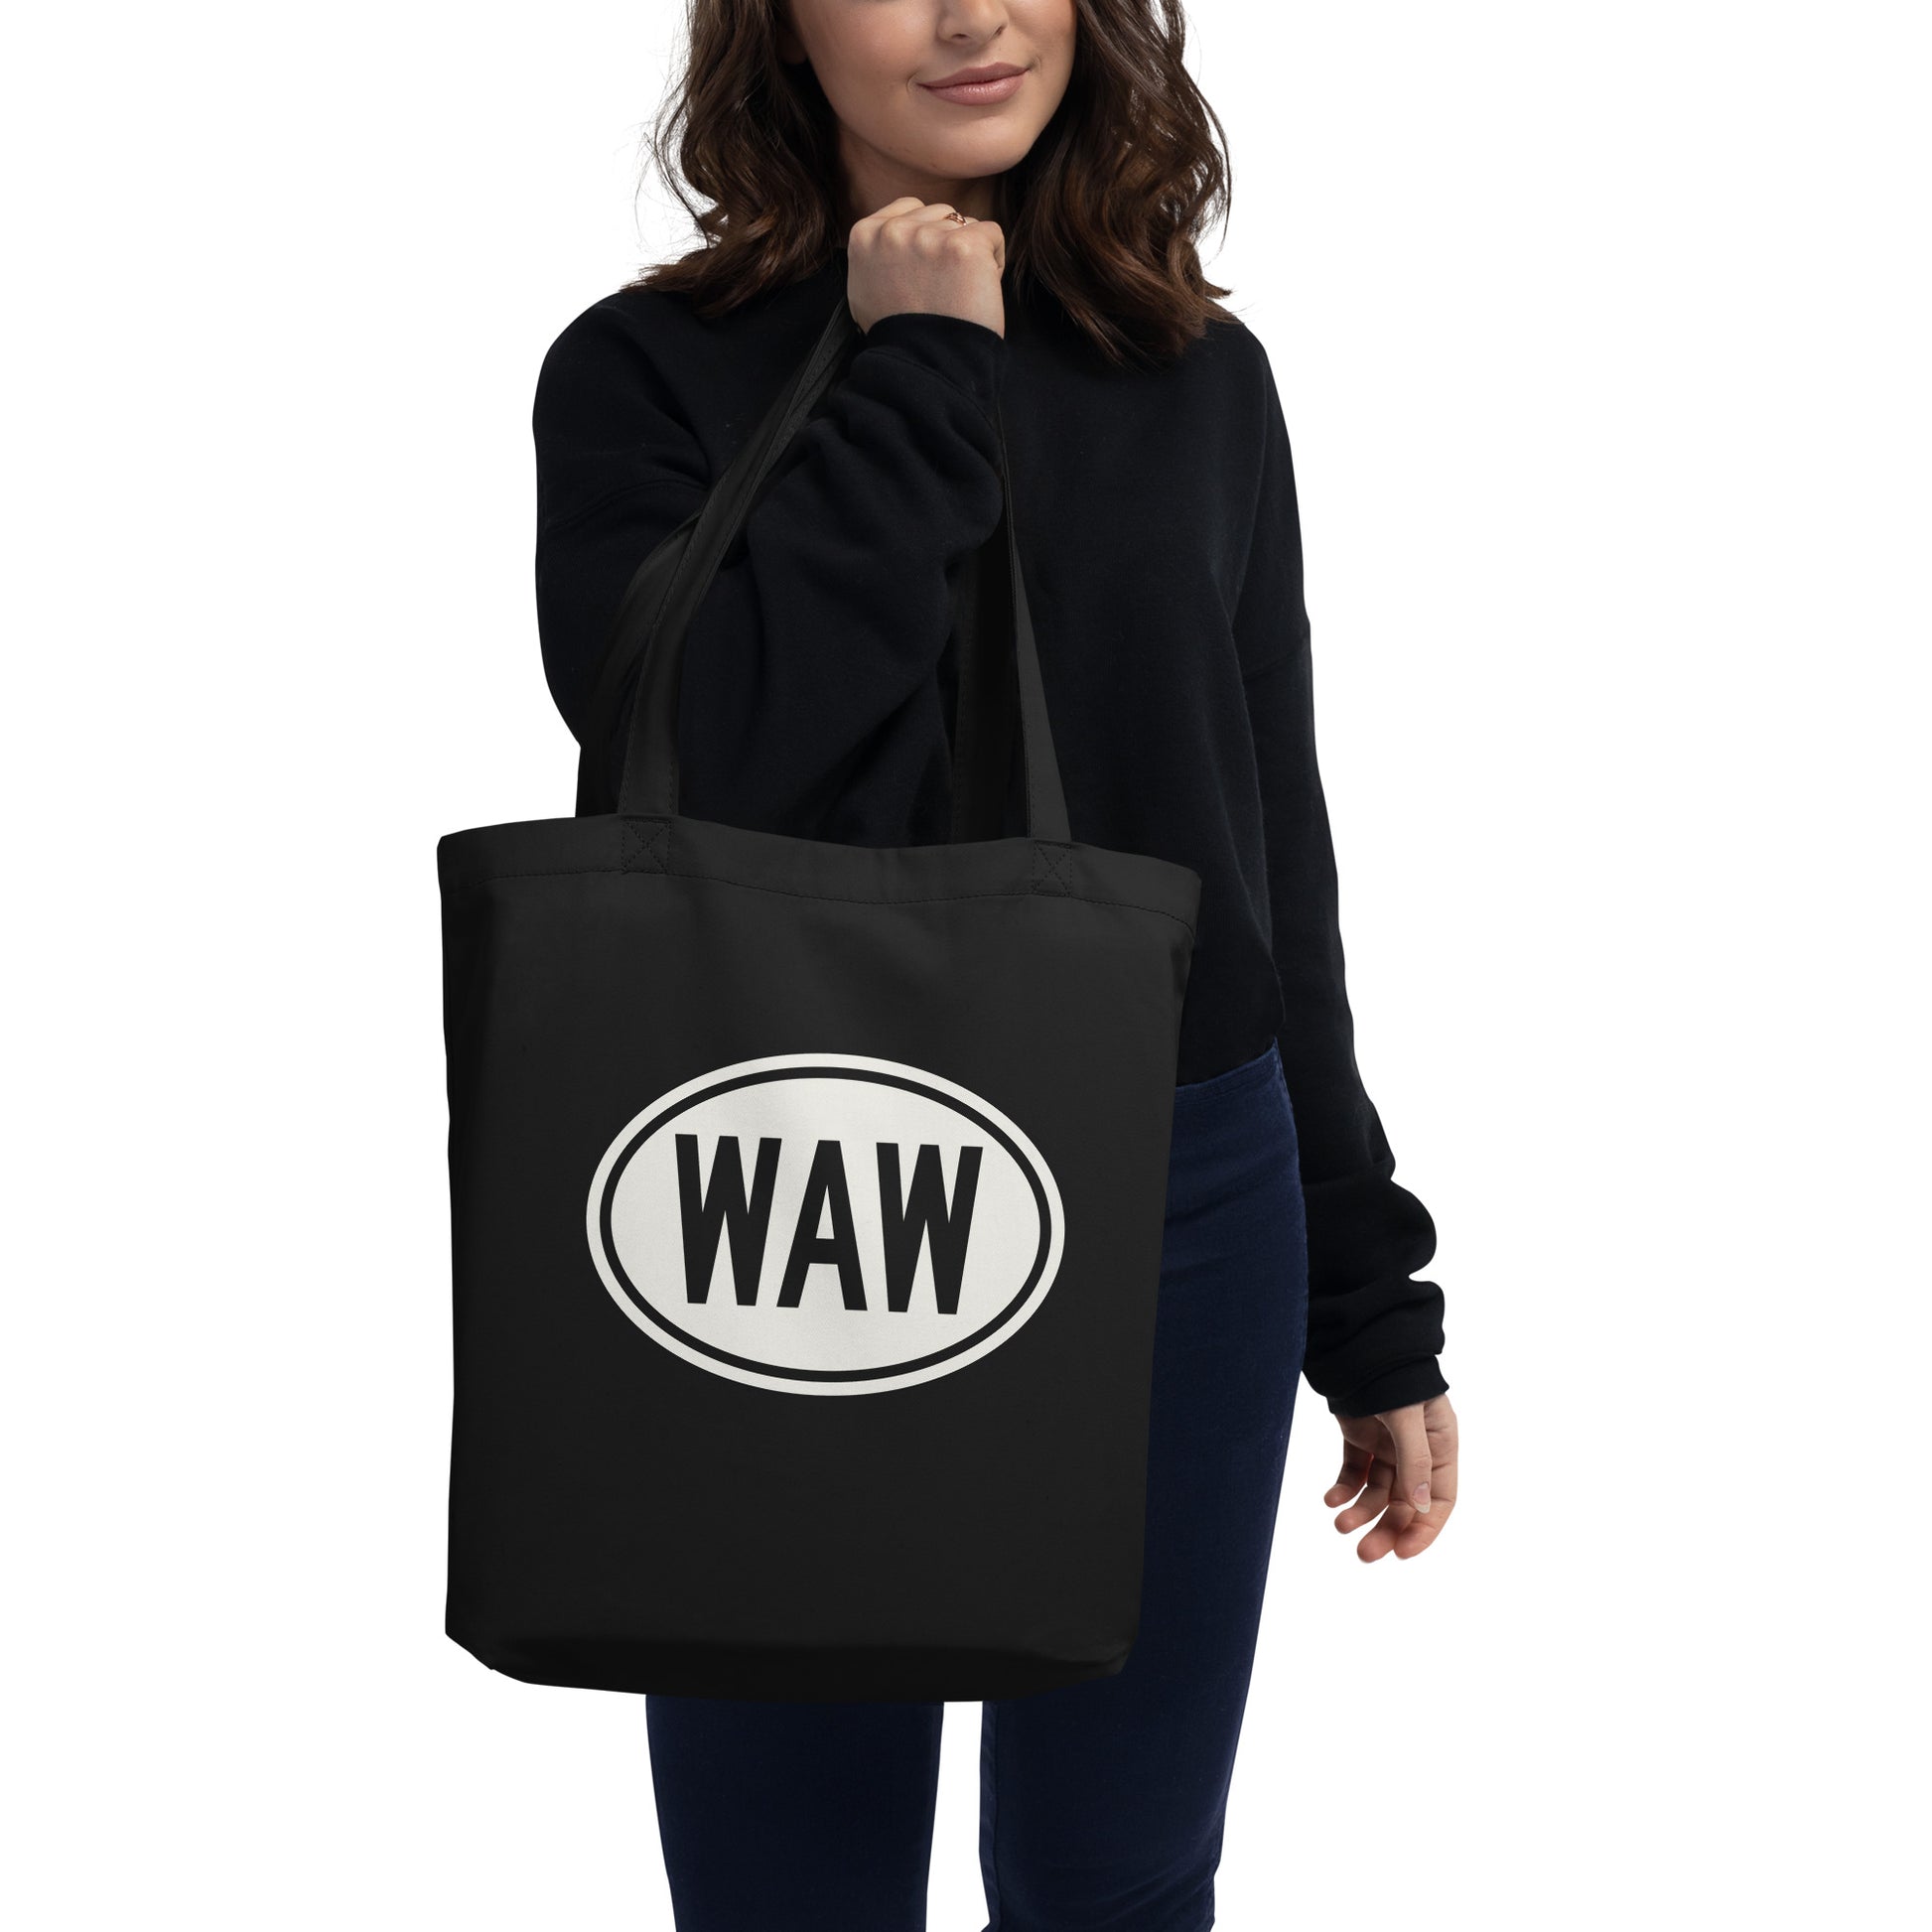 Unique Travel Gift Organic Tote - White Oval • WAW Warsaw • YHM Designs - Image 03